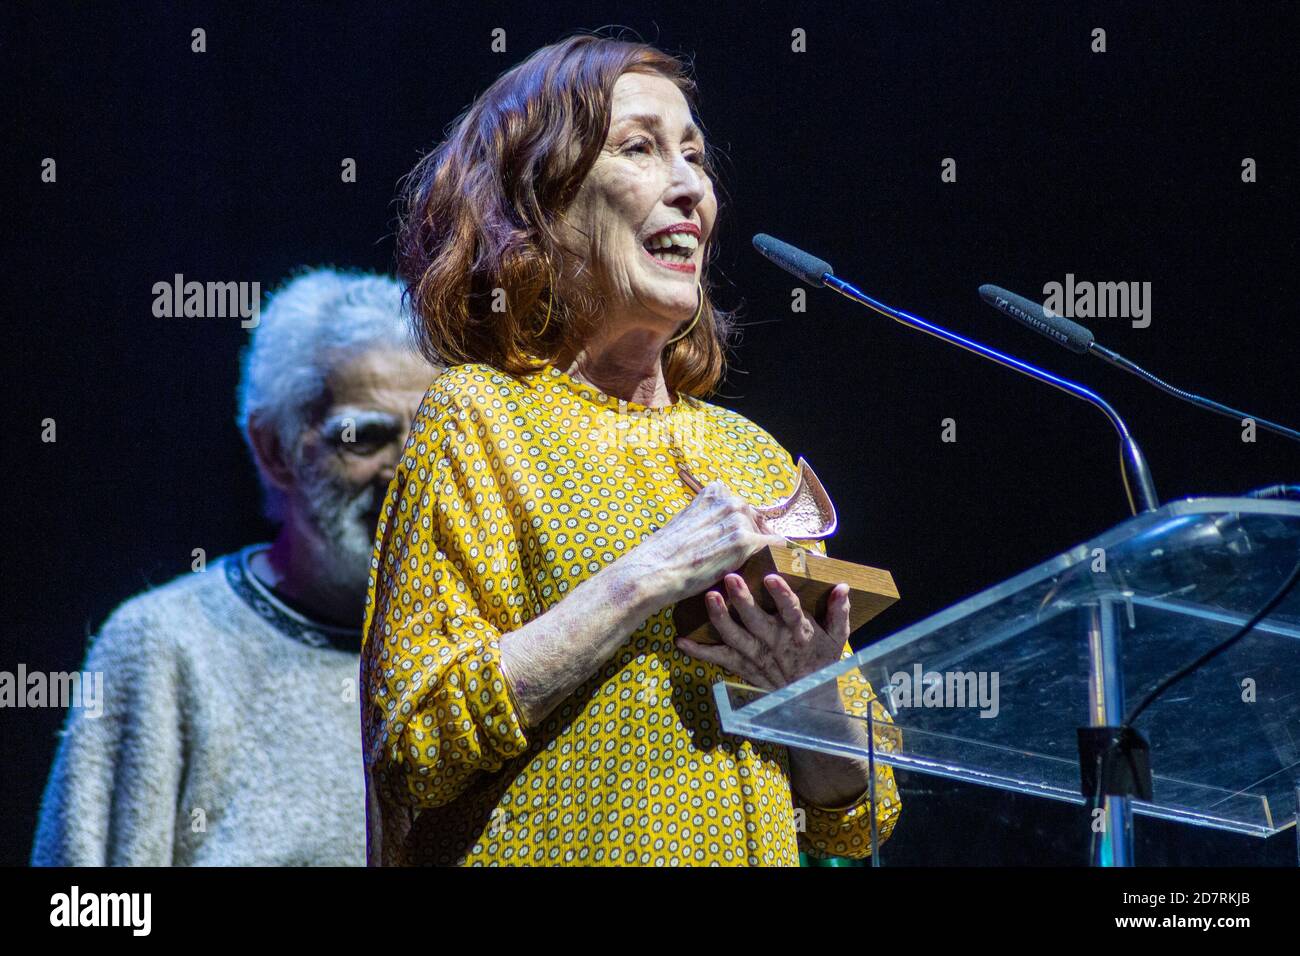 Veronica Forque receives her award from 'Union de Actores' Awards 2020 at Teatro Circo Price in Madrid, Spain.March 09, 2020. (Oscar Gil / Alfa Images Stock Photo